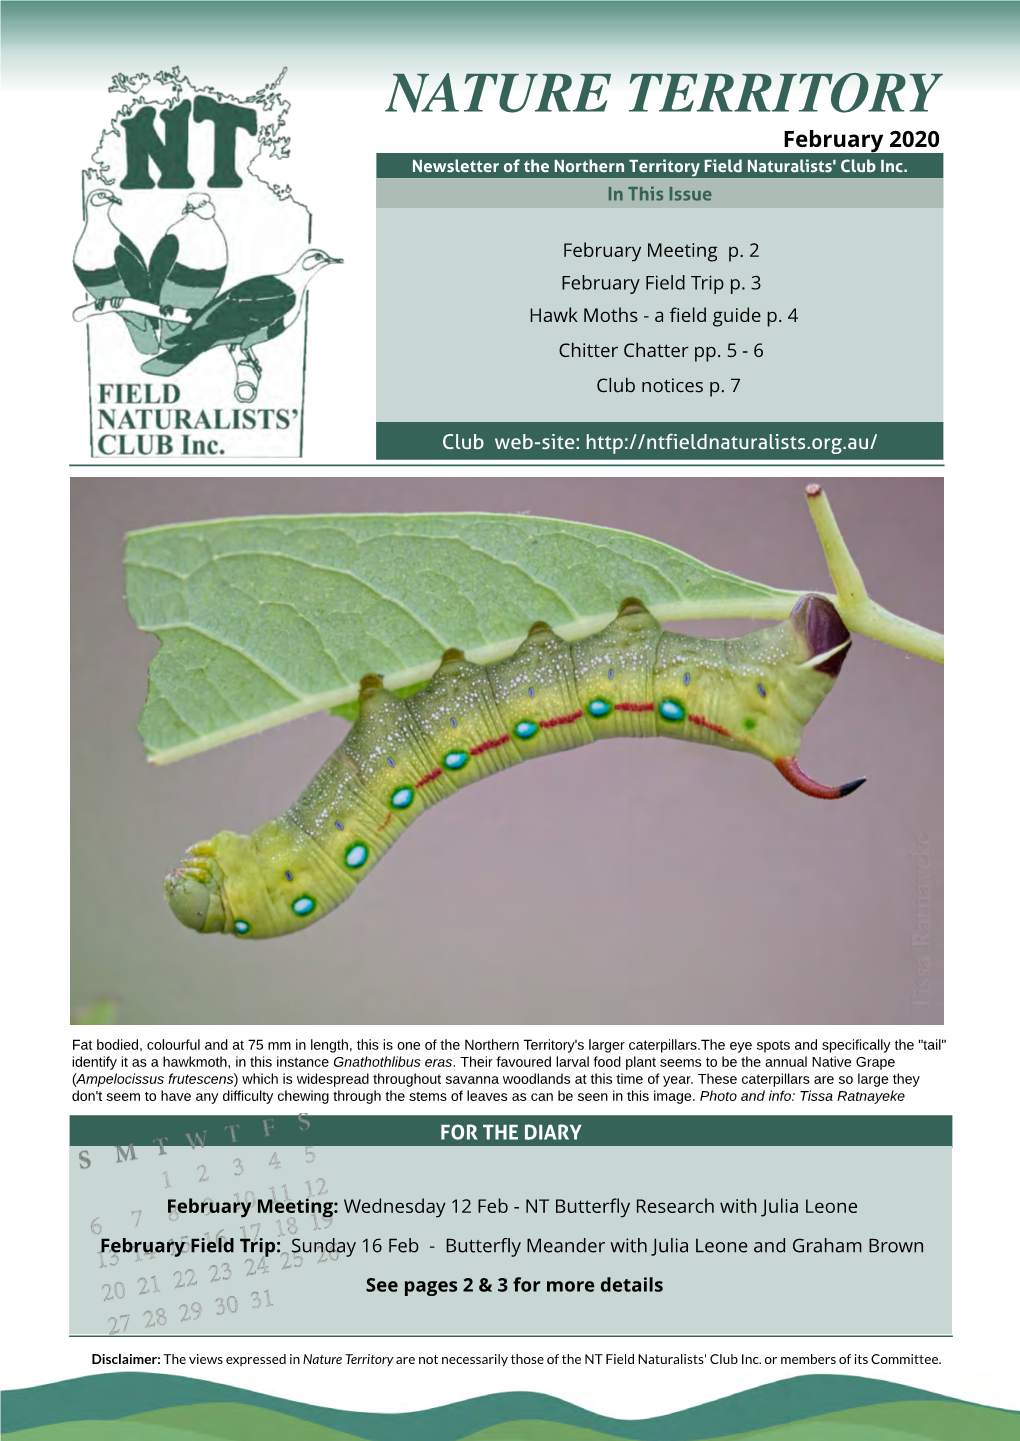 February 2020 Newsletter of the Northern Territory Field Naturalists' Club Inc